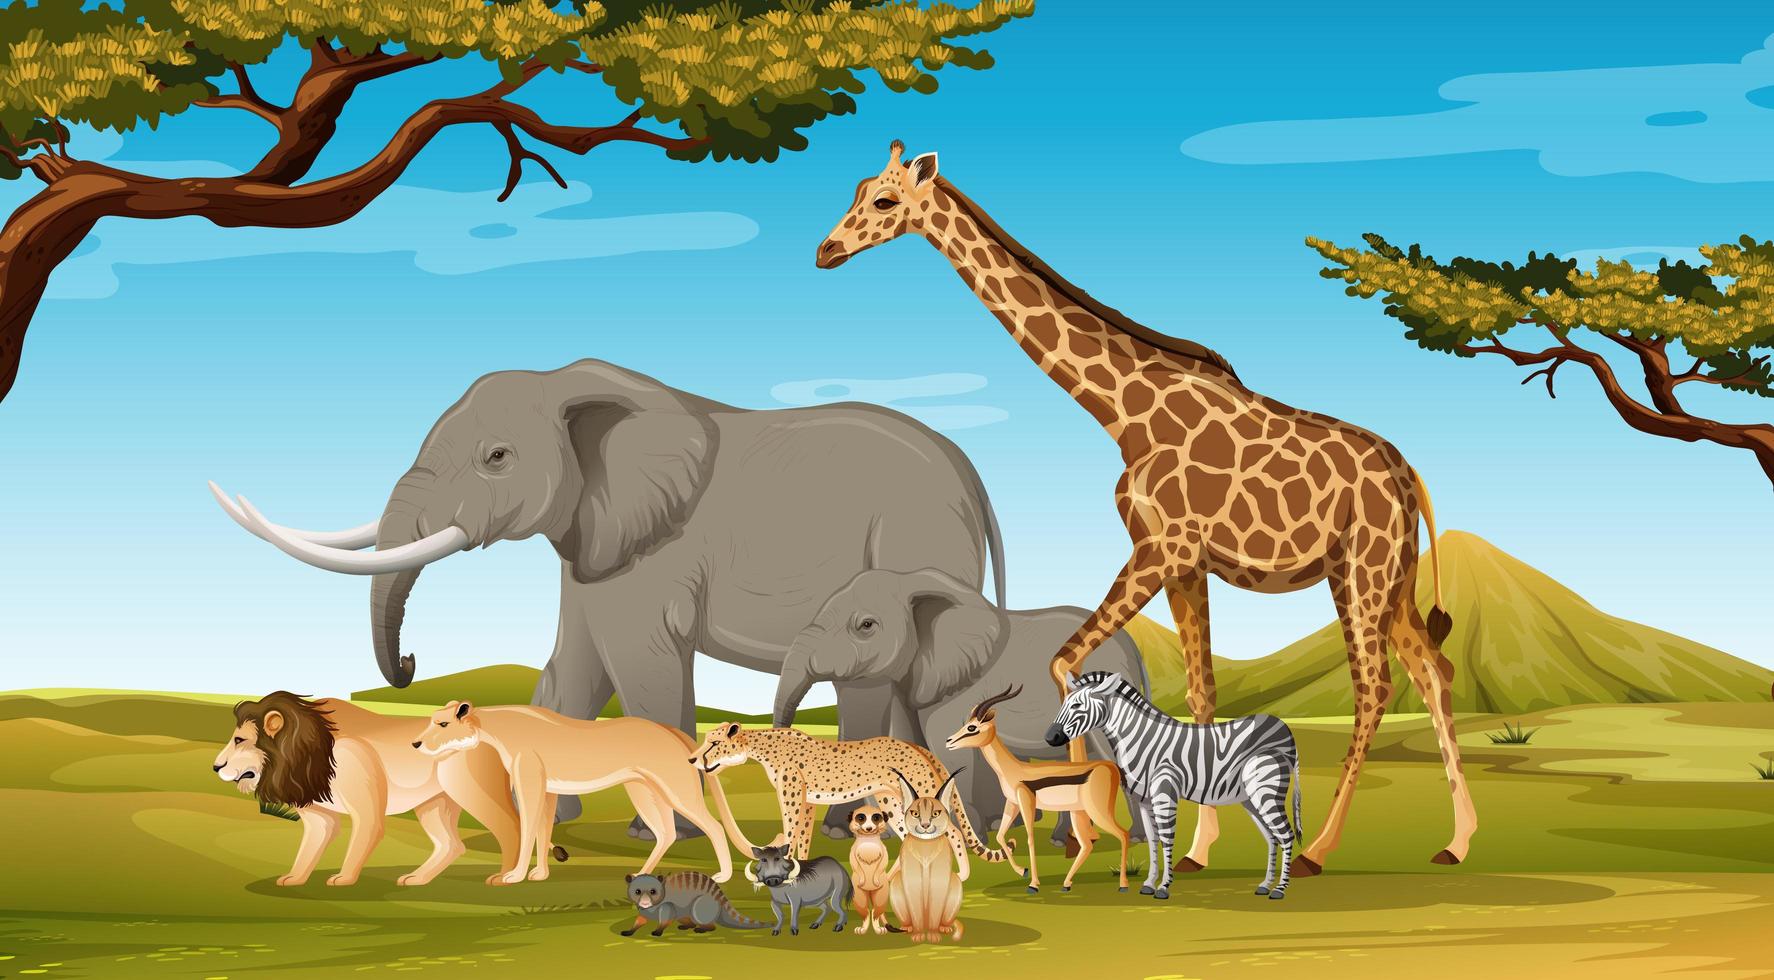 Group of Wild African Animal in the forest scene vector